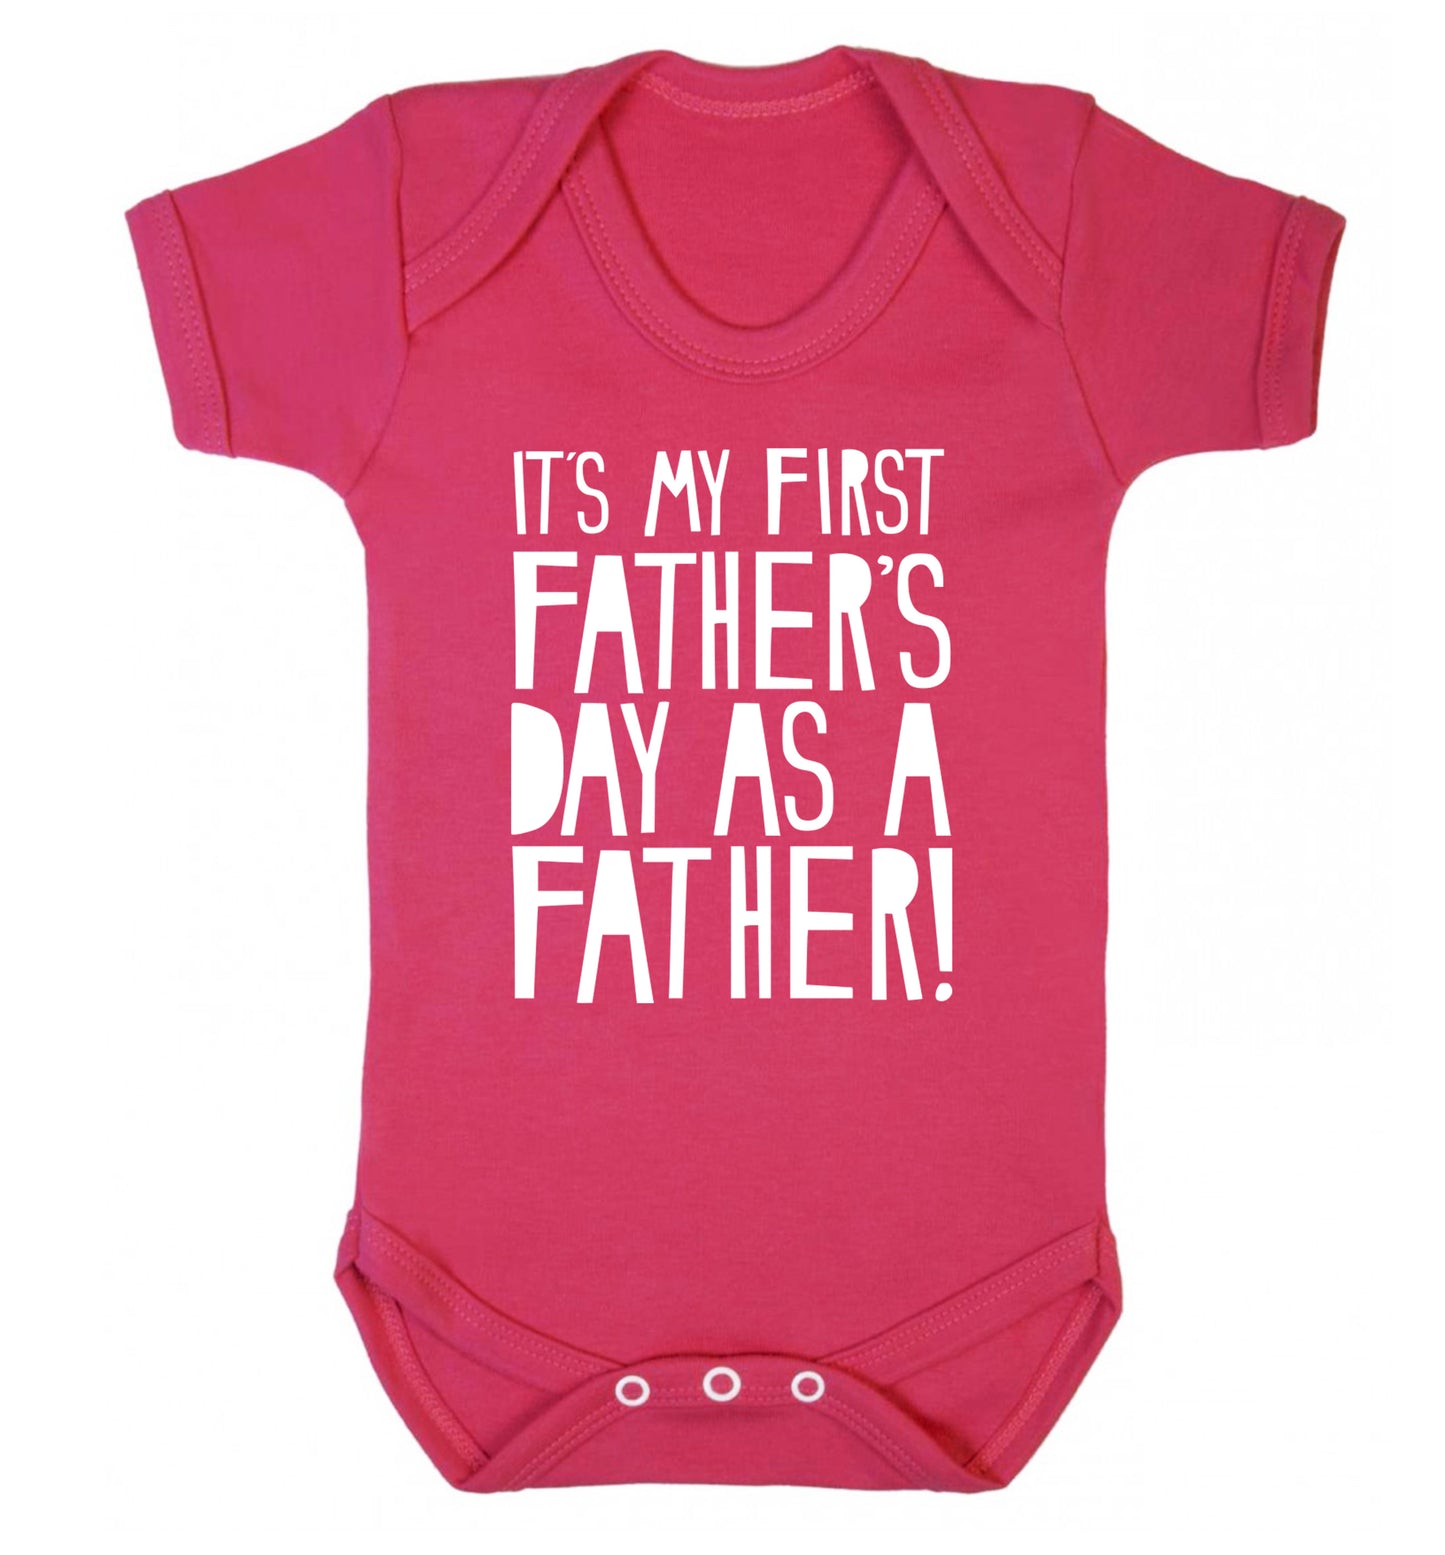 It's my first Father's Day as a father! Baby Vest dark pink 18-24 months